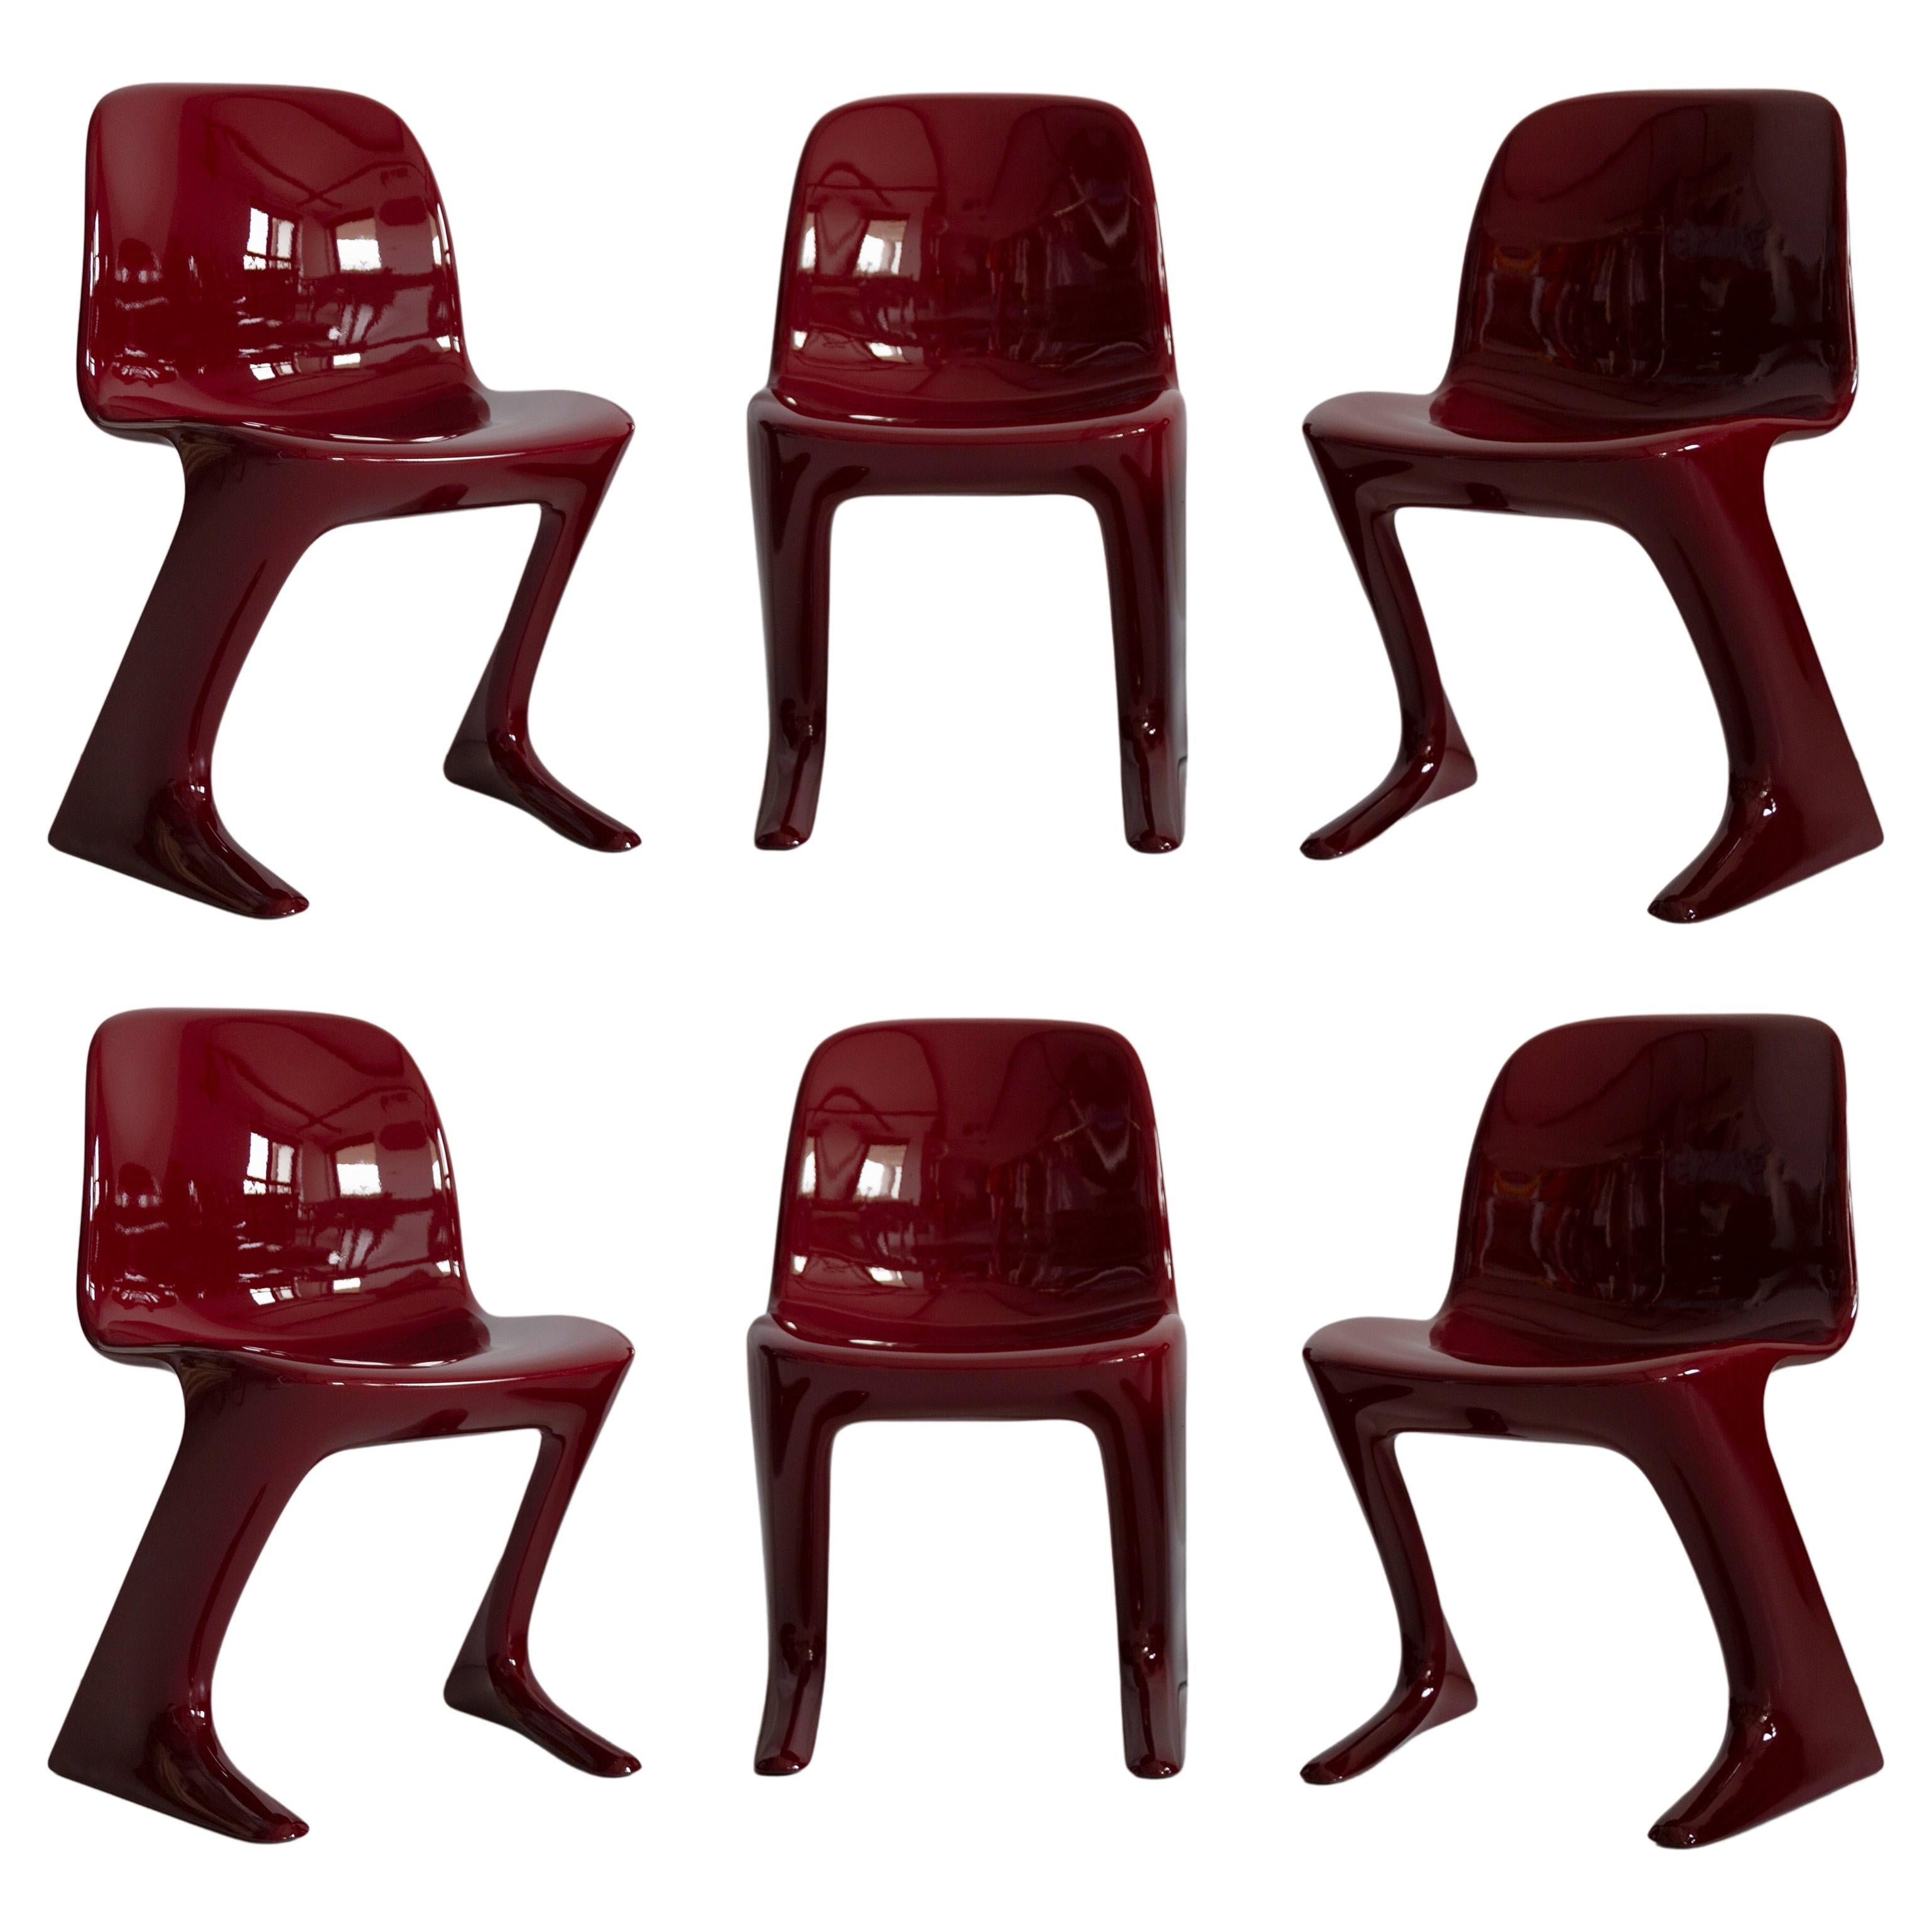 Set of Six Red Wine Kangaroo Chairs Designed by Ernst Moeckl, Germany, 1968